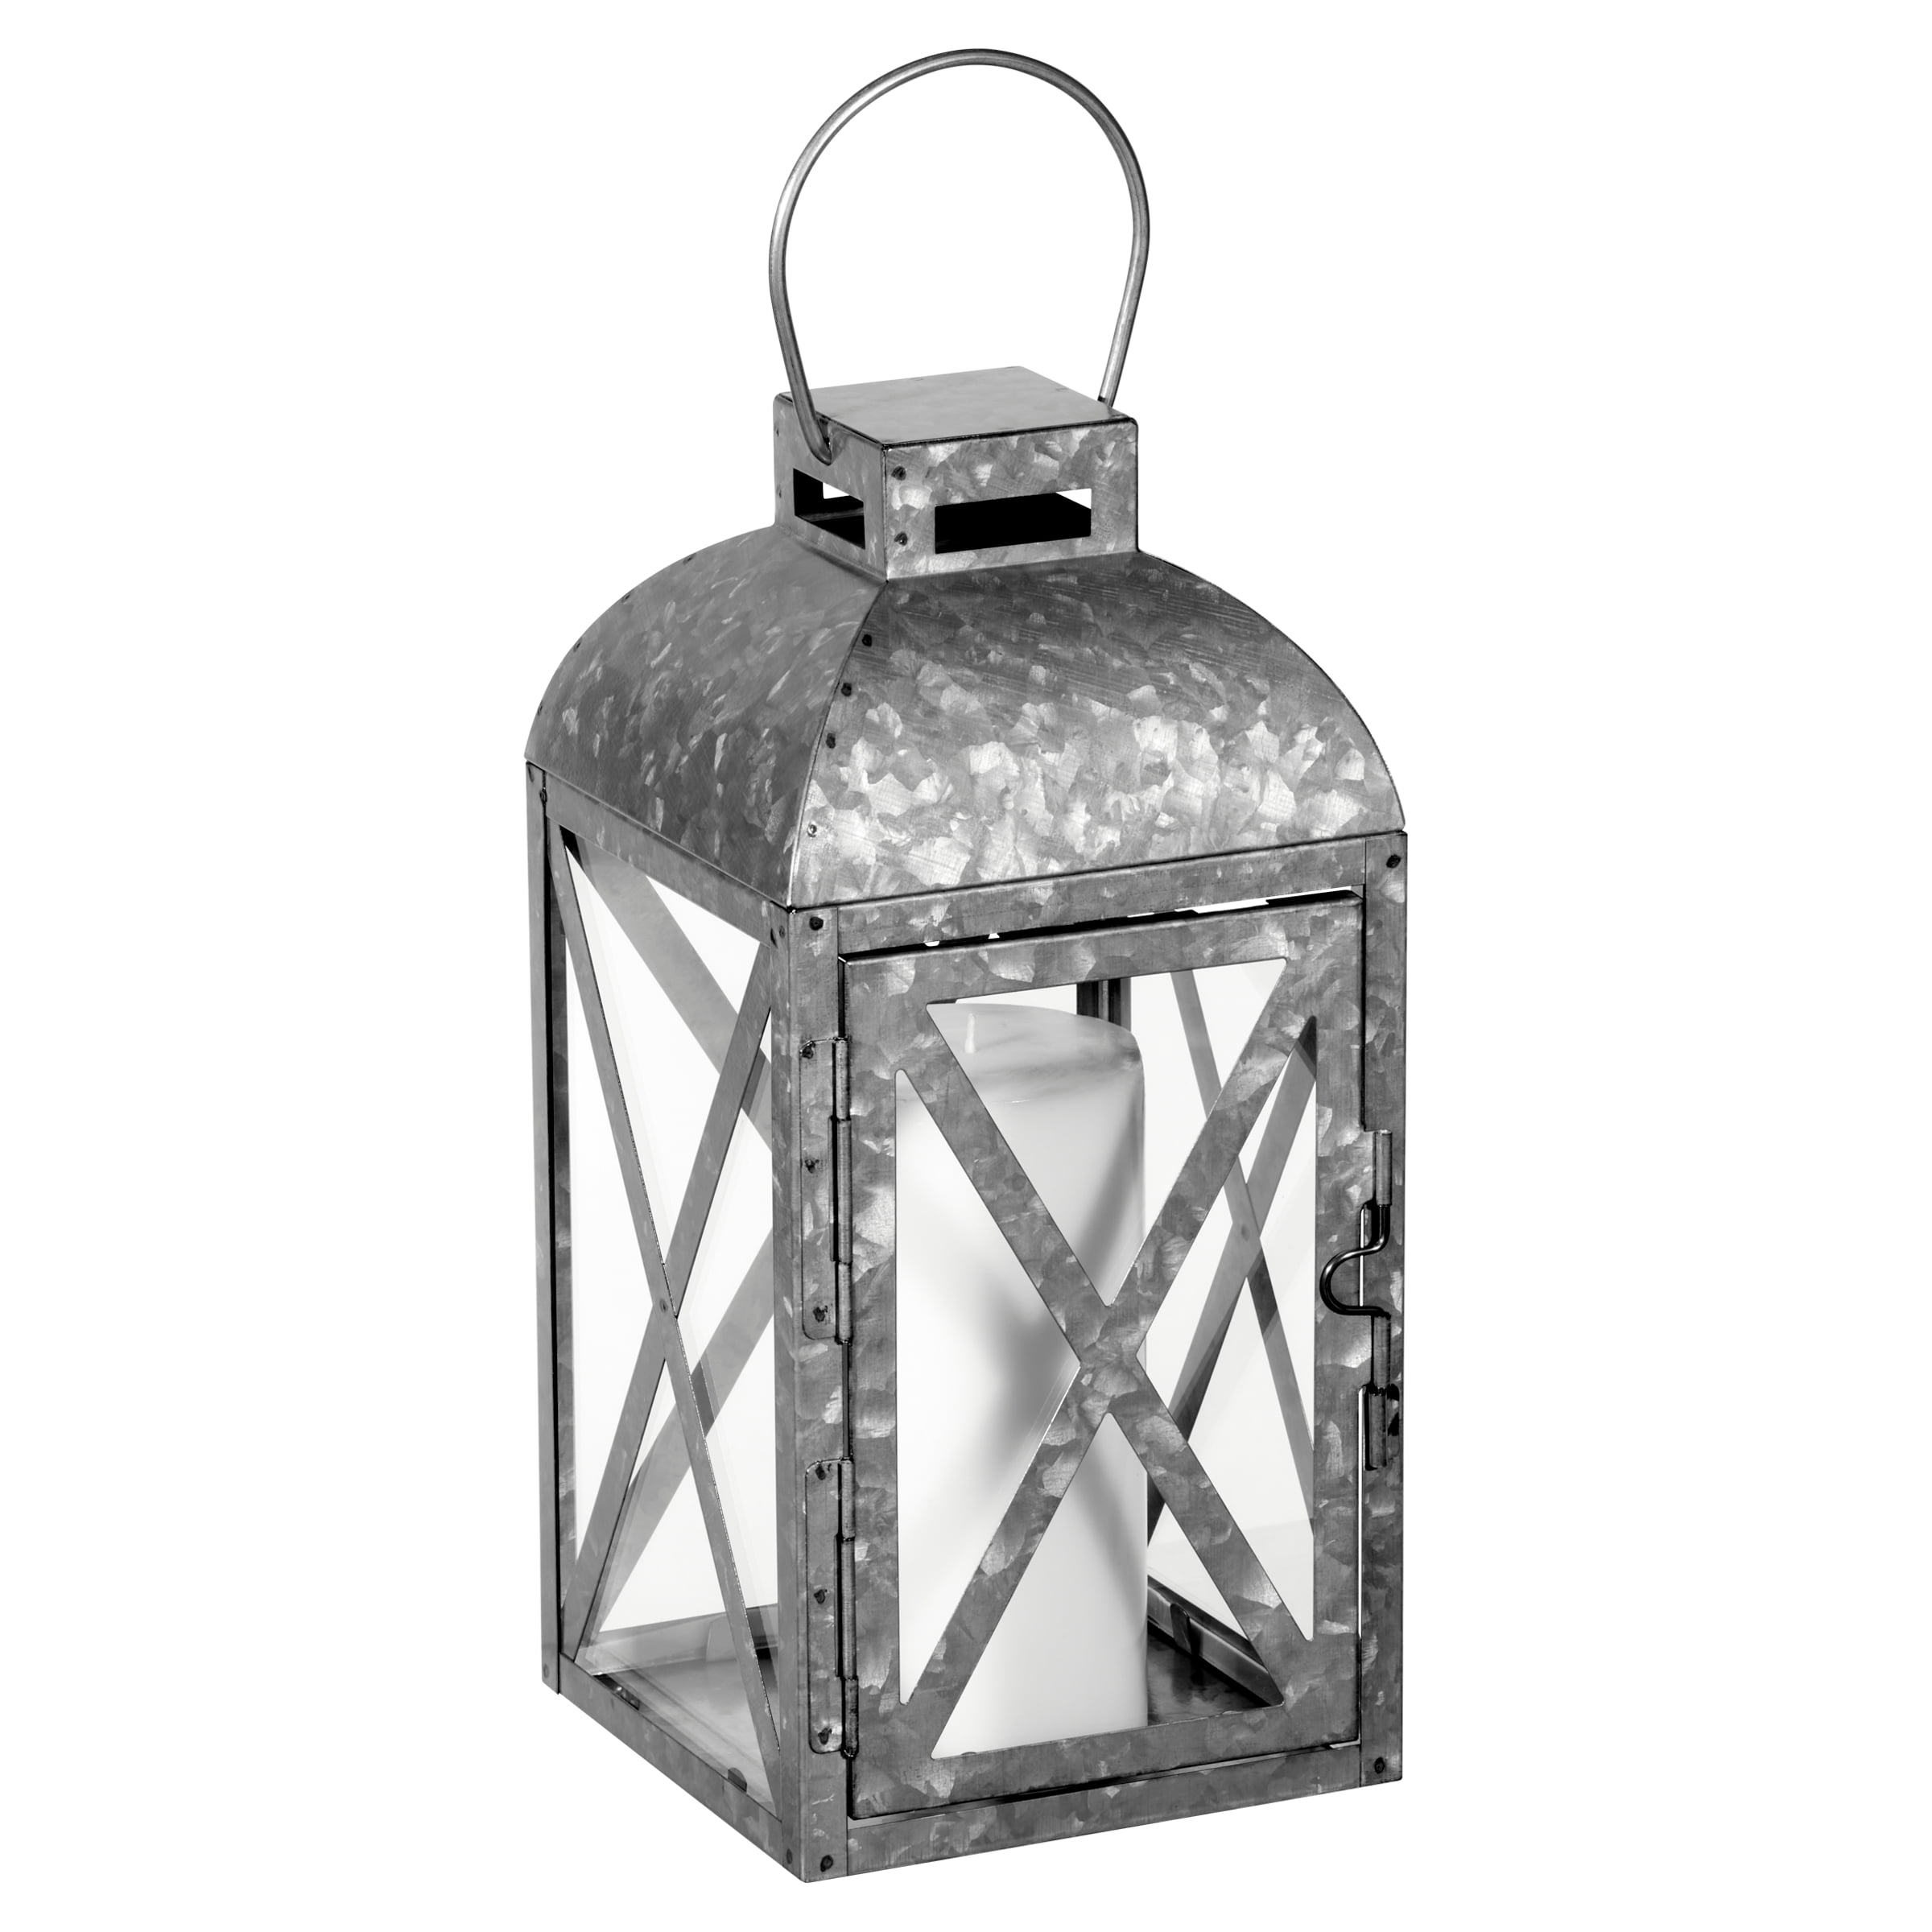 Metal Candle Holder Small Iron Lantern Shaped Lantern Candle Holder Black  White Color From Yf20150307, $6.02